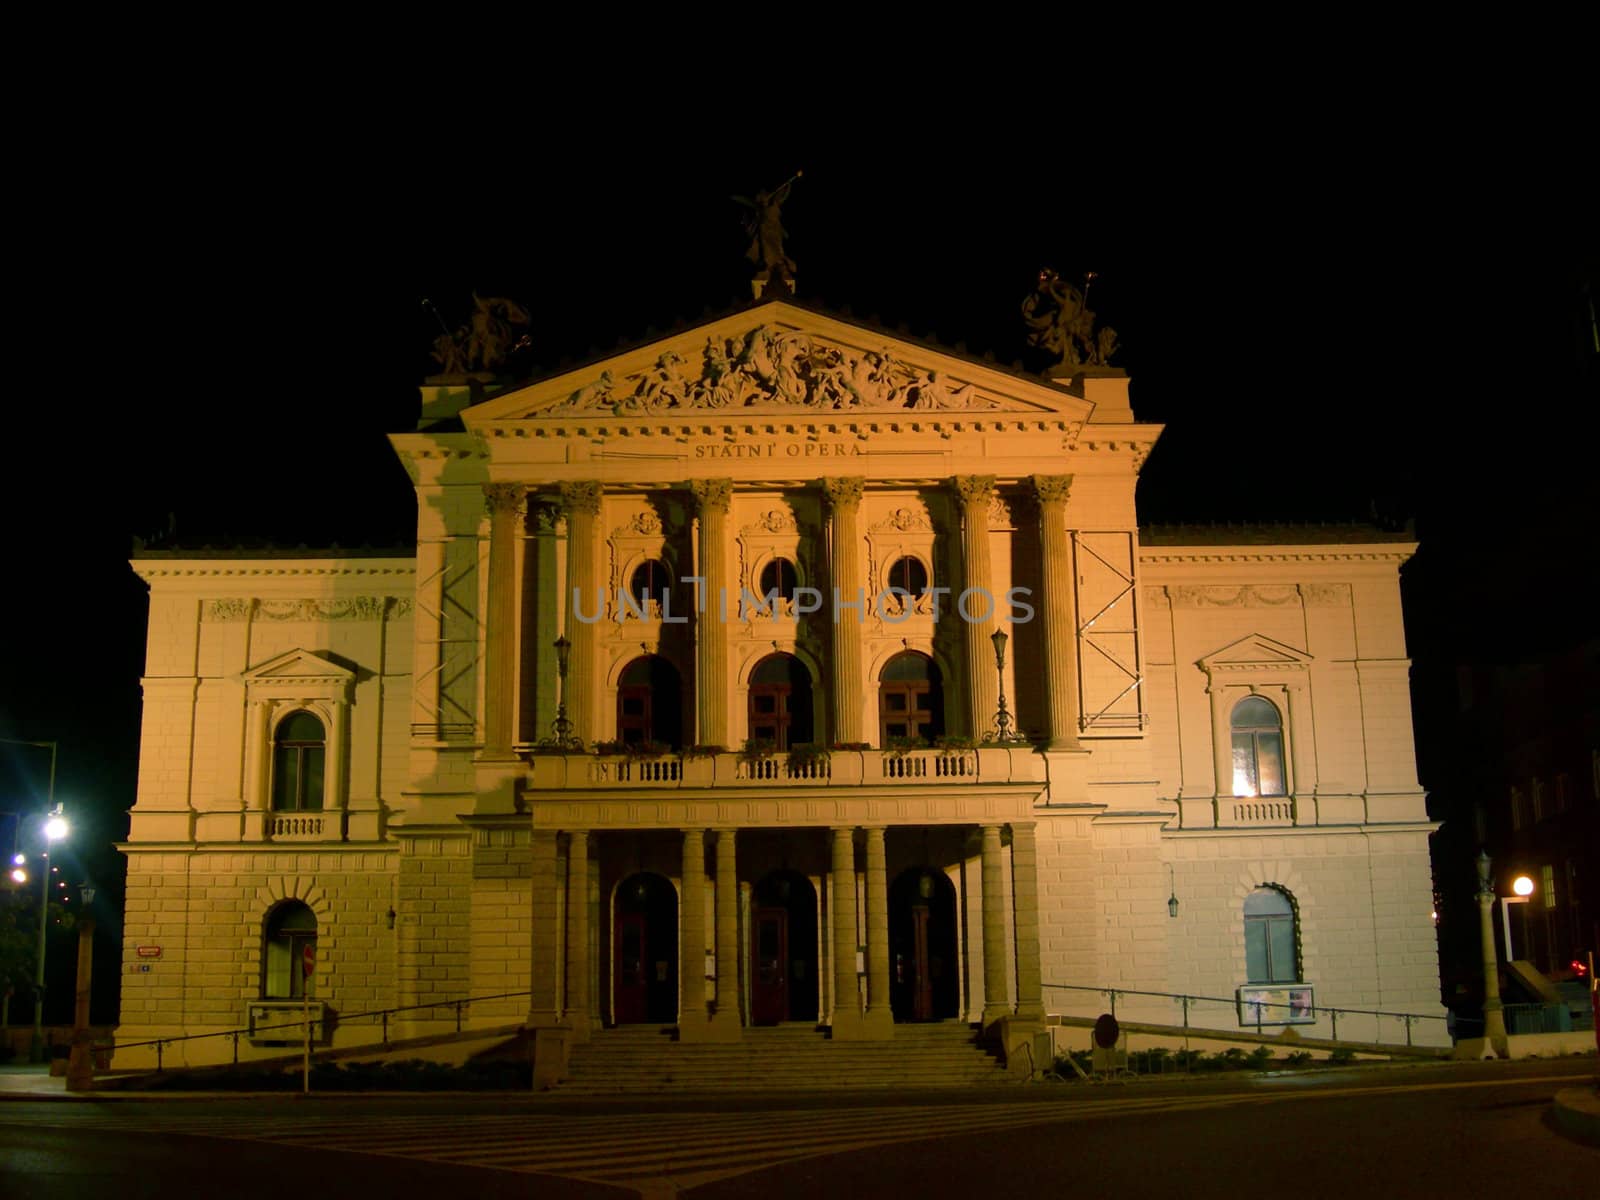  Historical building of the State opera in Prague at night   